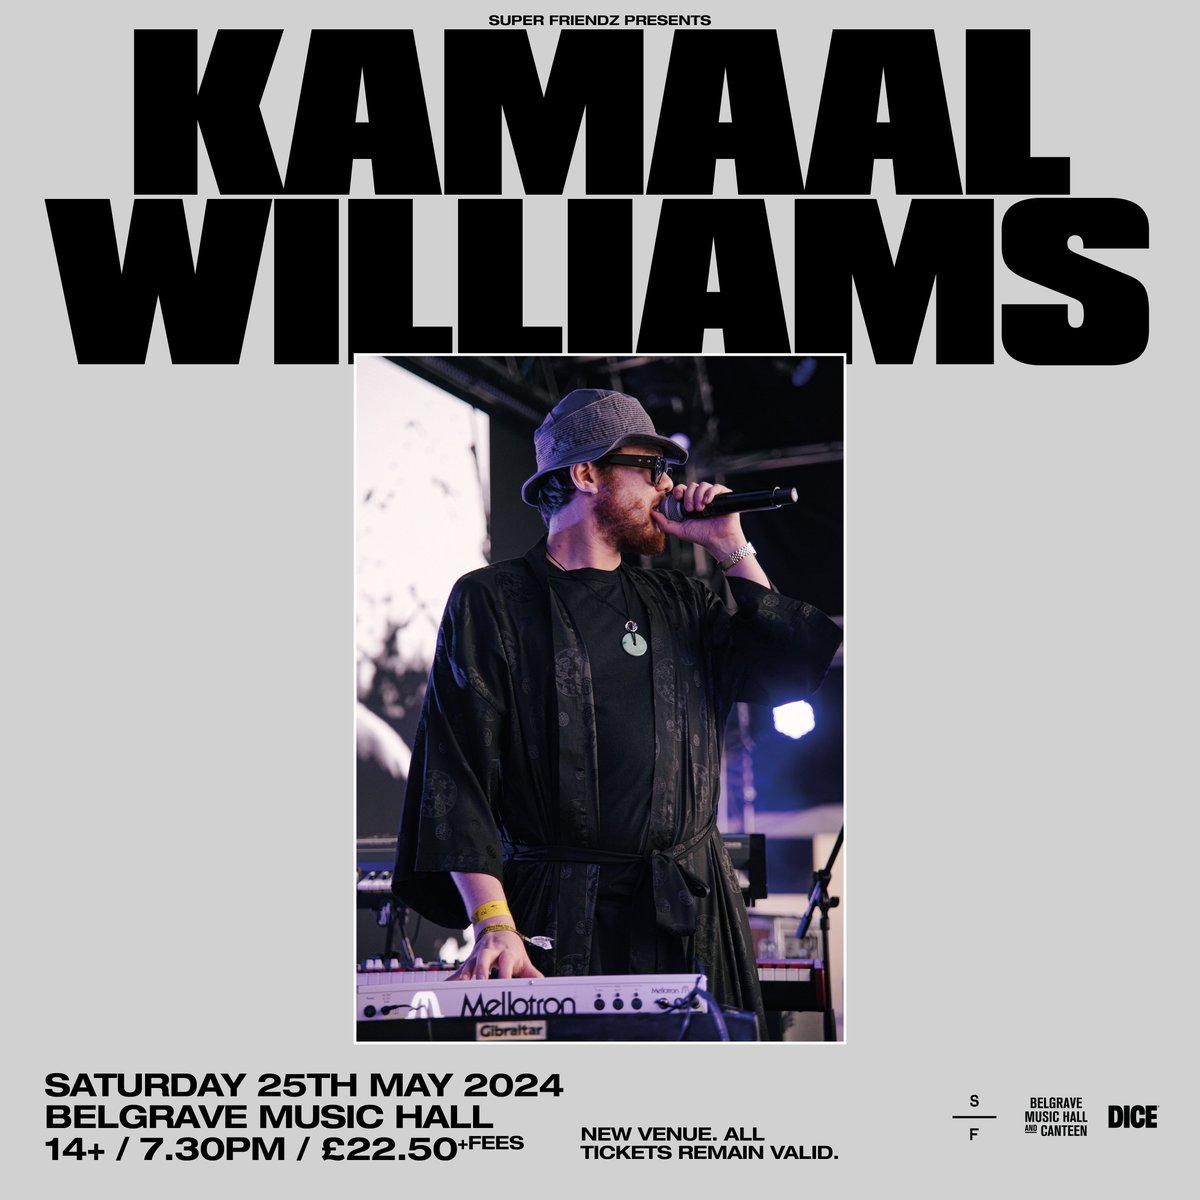 🚨 IMPORTANT UPDATE 🚨 @kamaalwilliams' show on Saturday 25th May will now take place at @belgravemusichall. All original tickets remain valid. If you haven't already, head to @dicefm to secure tickets now! dice.fm/event/b9y6x-ka…